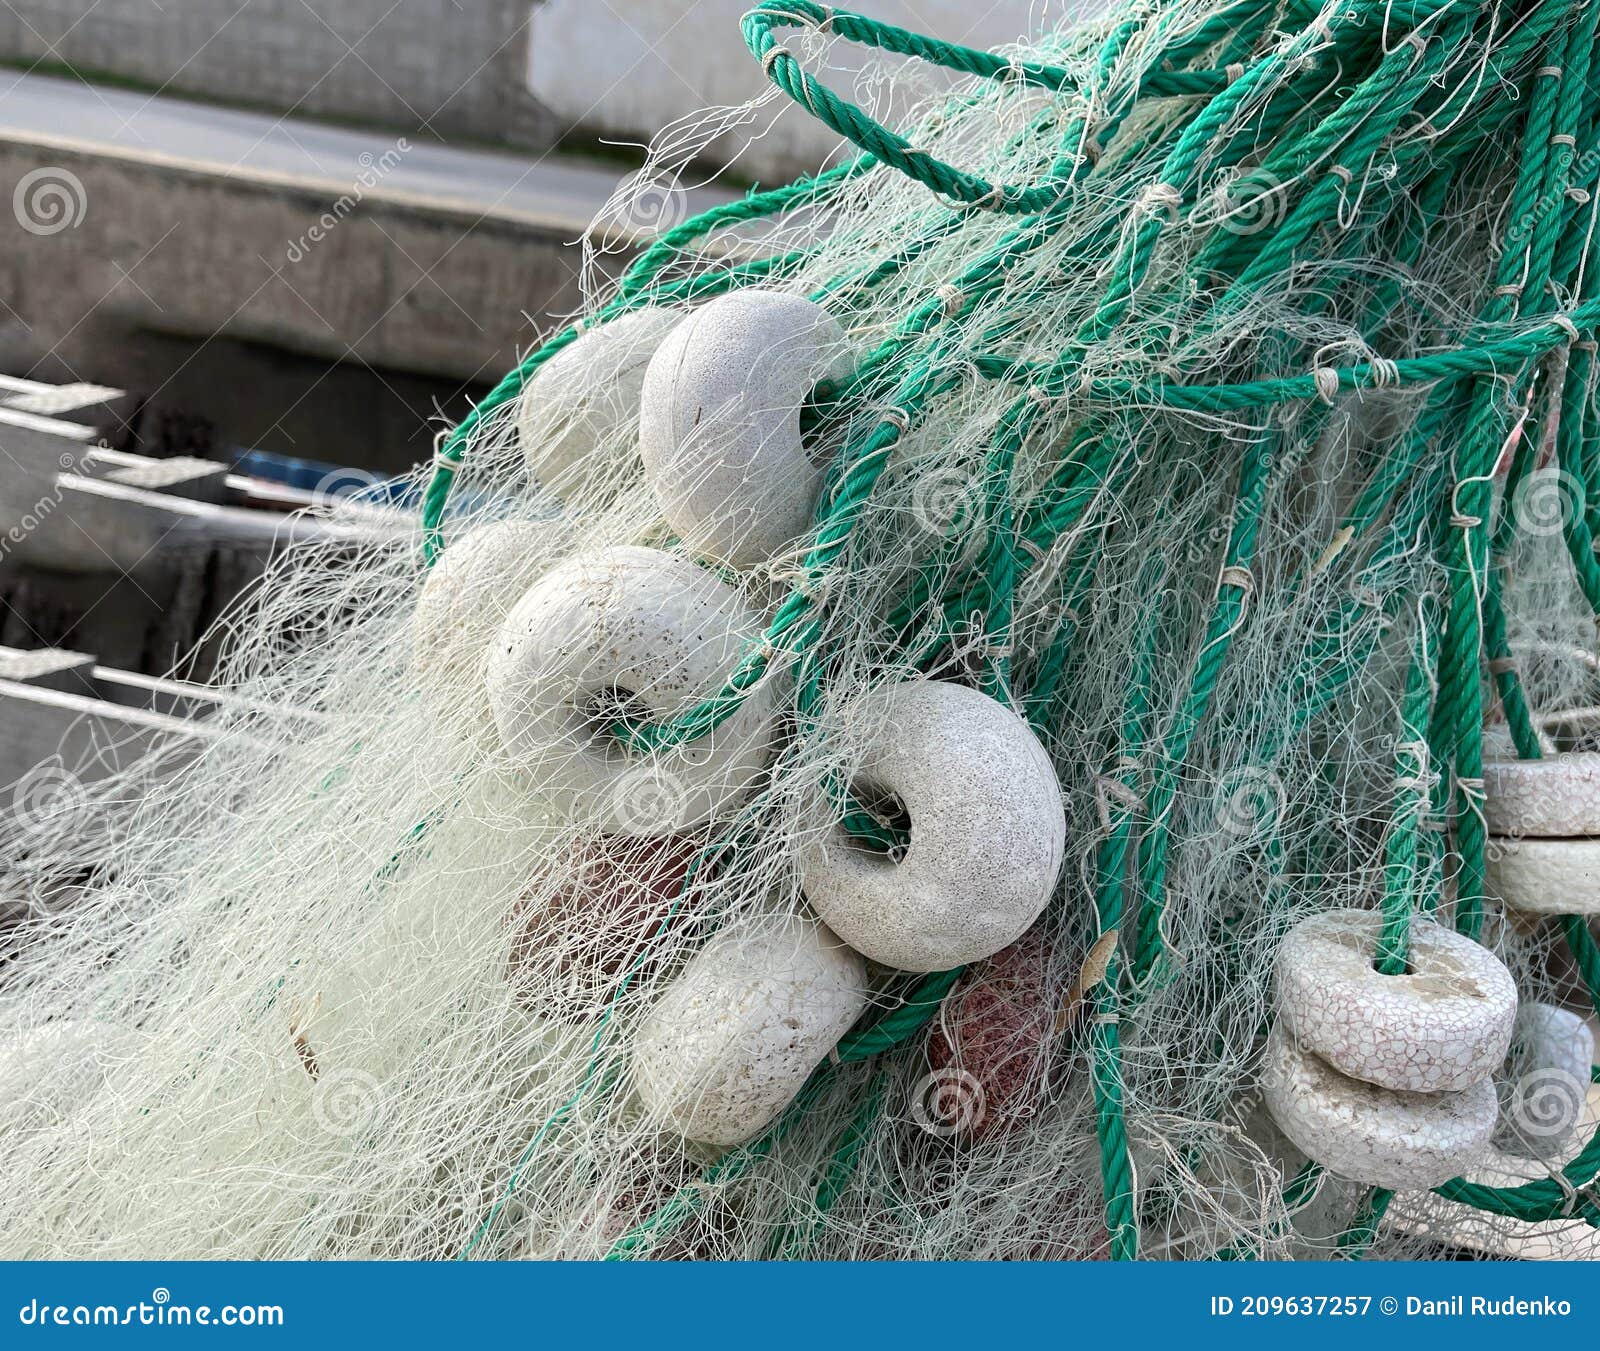 Large Fishing Net with Floats Stock Image - Image of fishnet, tackle:  209637257